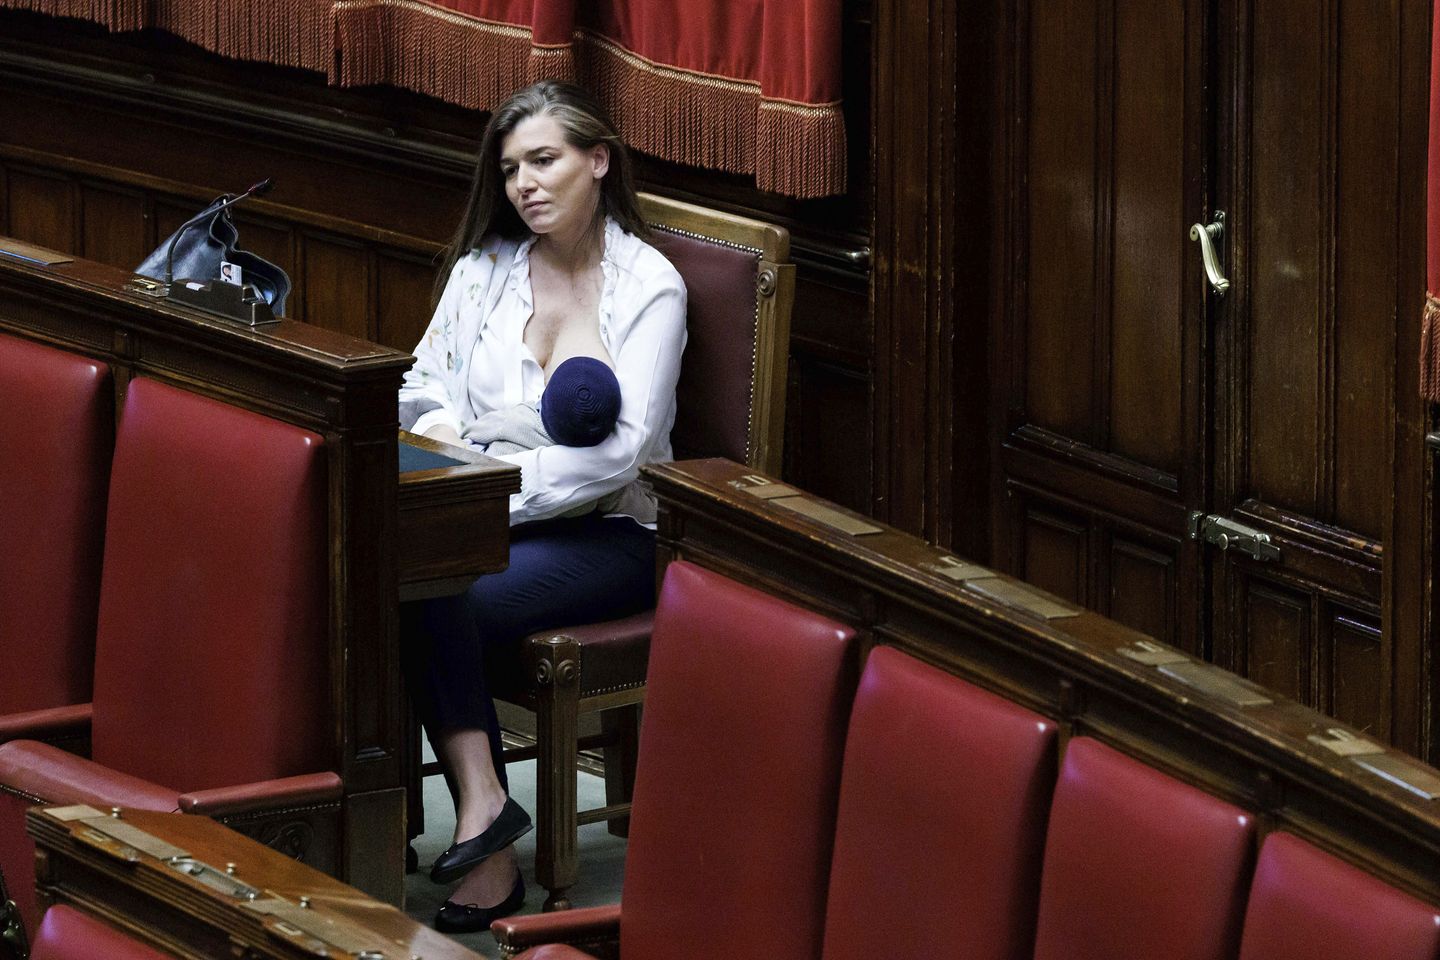 Italian lawmaker who fought to allow nursing one's baby during working session is now first to do so